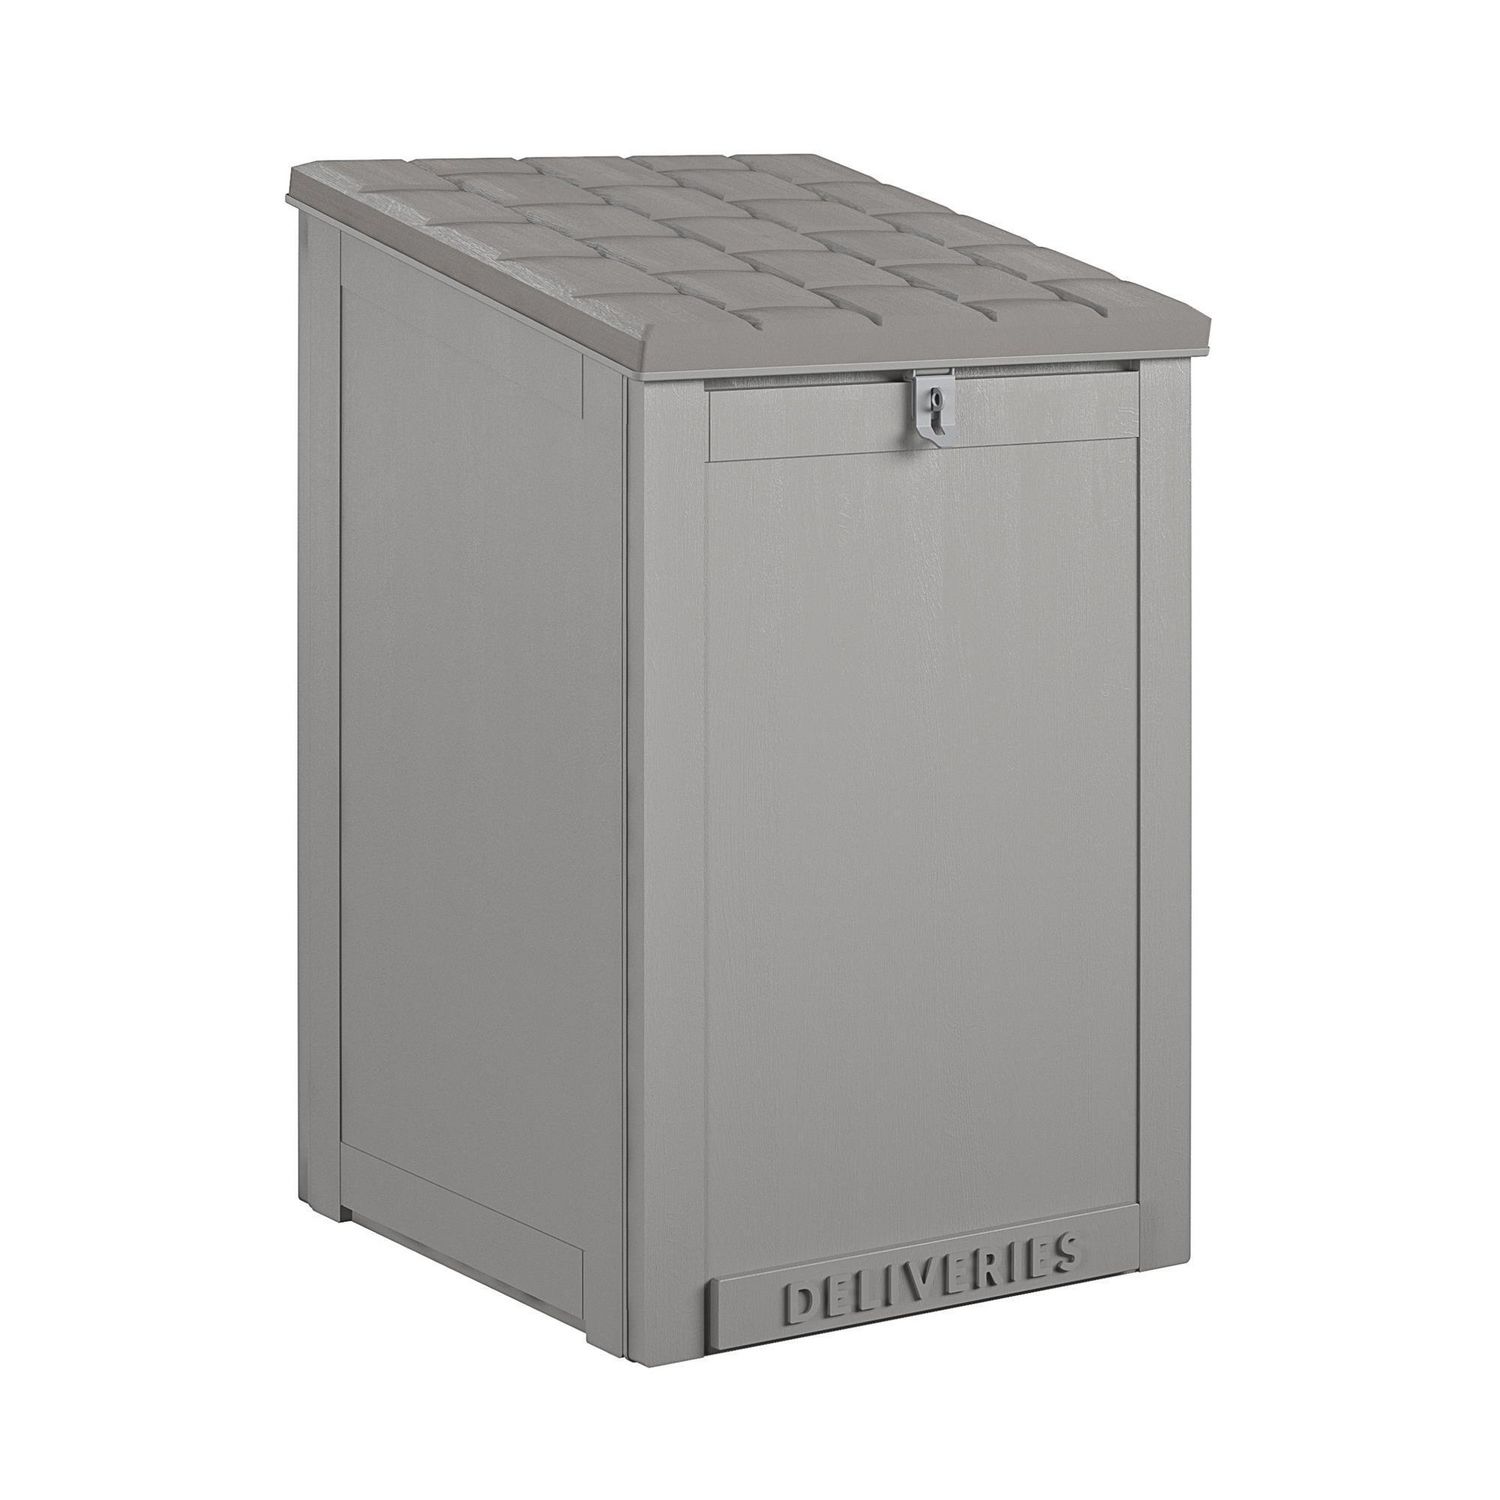 Black/Gray Cosco Outdoor Living 88333BGY1E BoxGuard Large Lockable Package Delivery and Storage Box 6.3 Cubic feet 